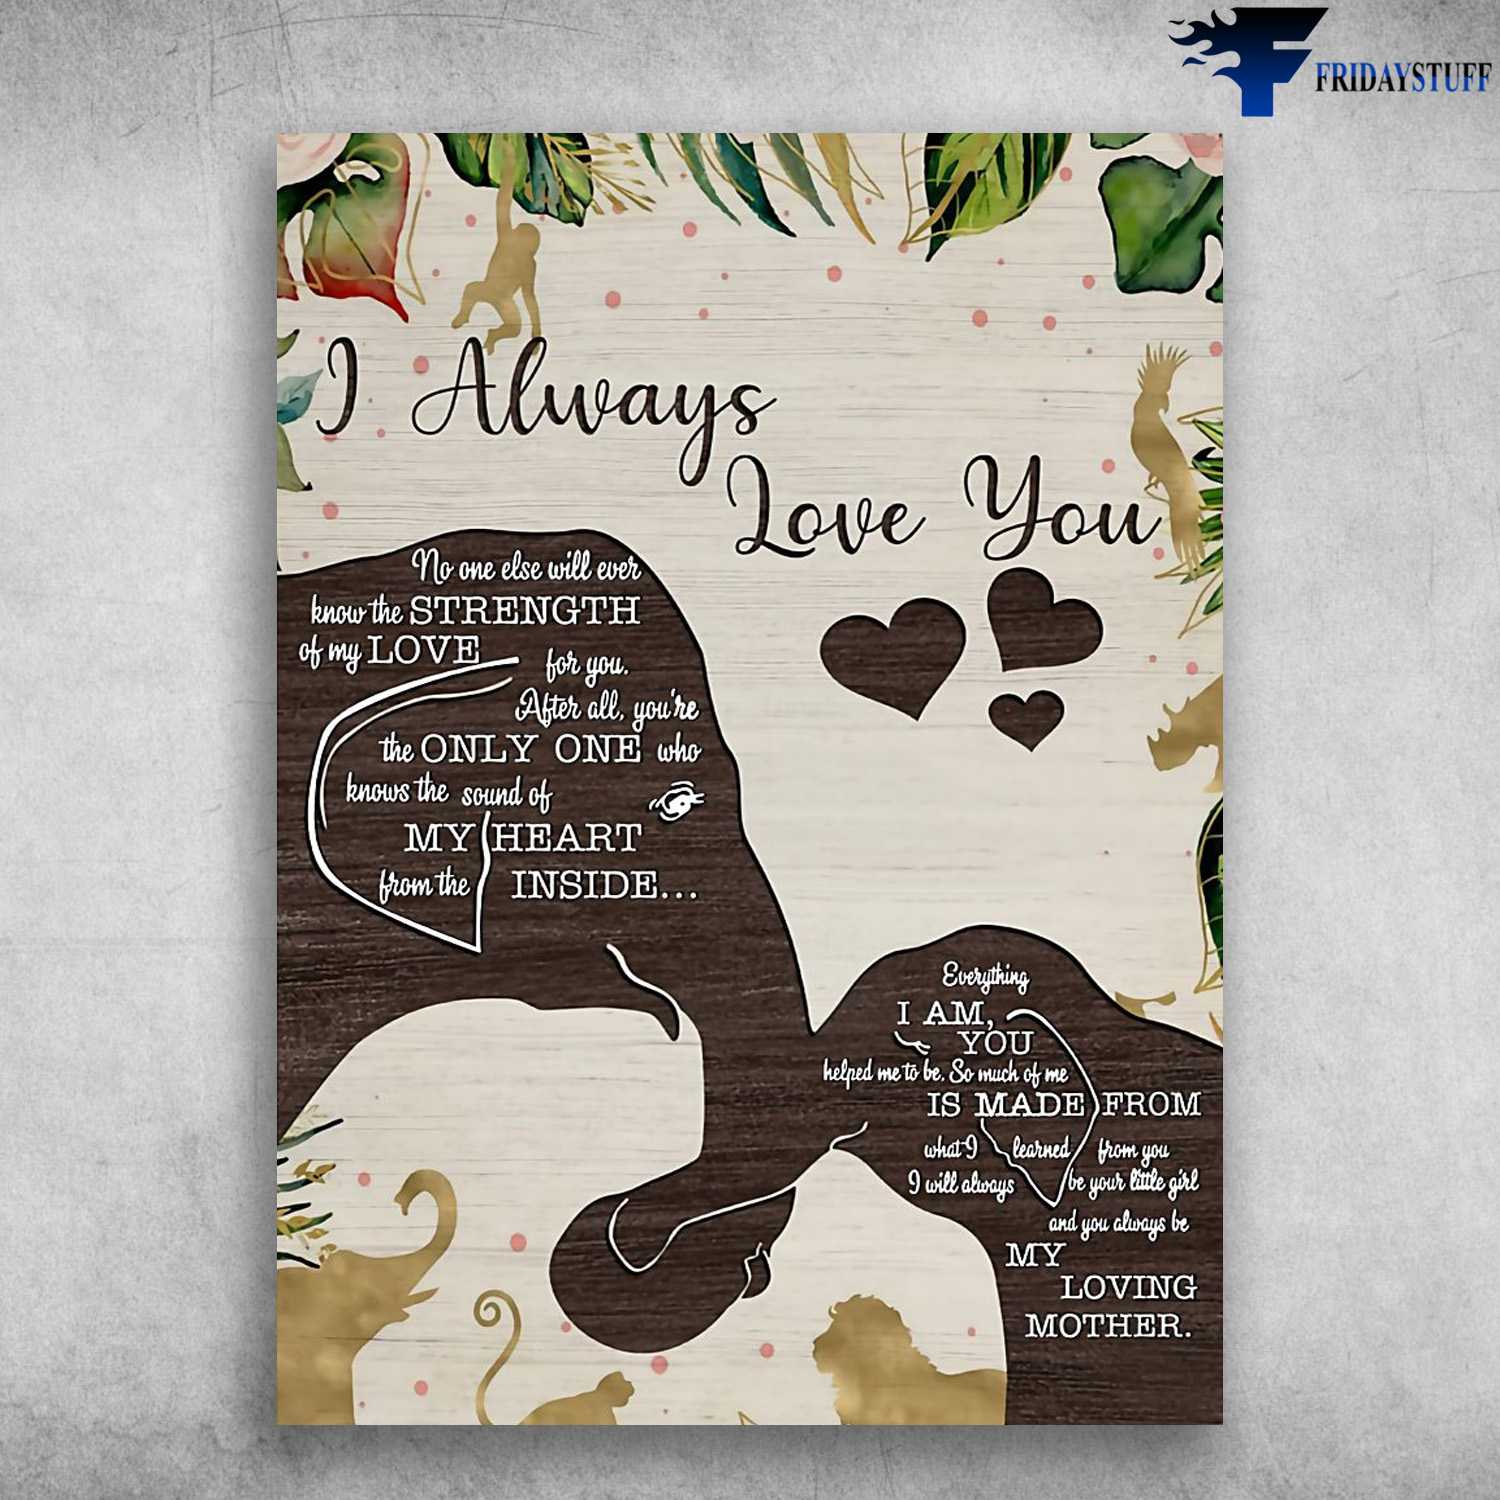 Elephant Poster, Mom And Son - I Alaways Love You, No One Else Will Ever Know, The Strength Of My Love For You, After All, You're The Only One, Who Know The Sound Of My Heart